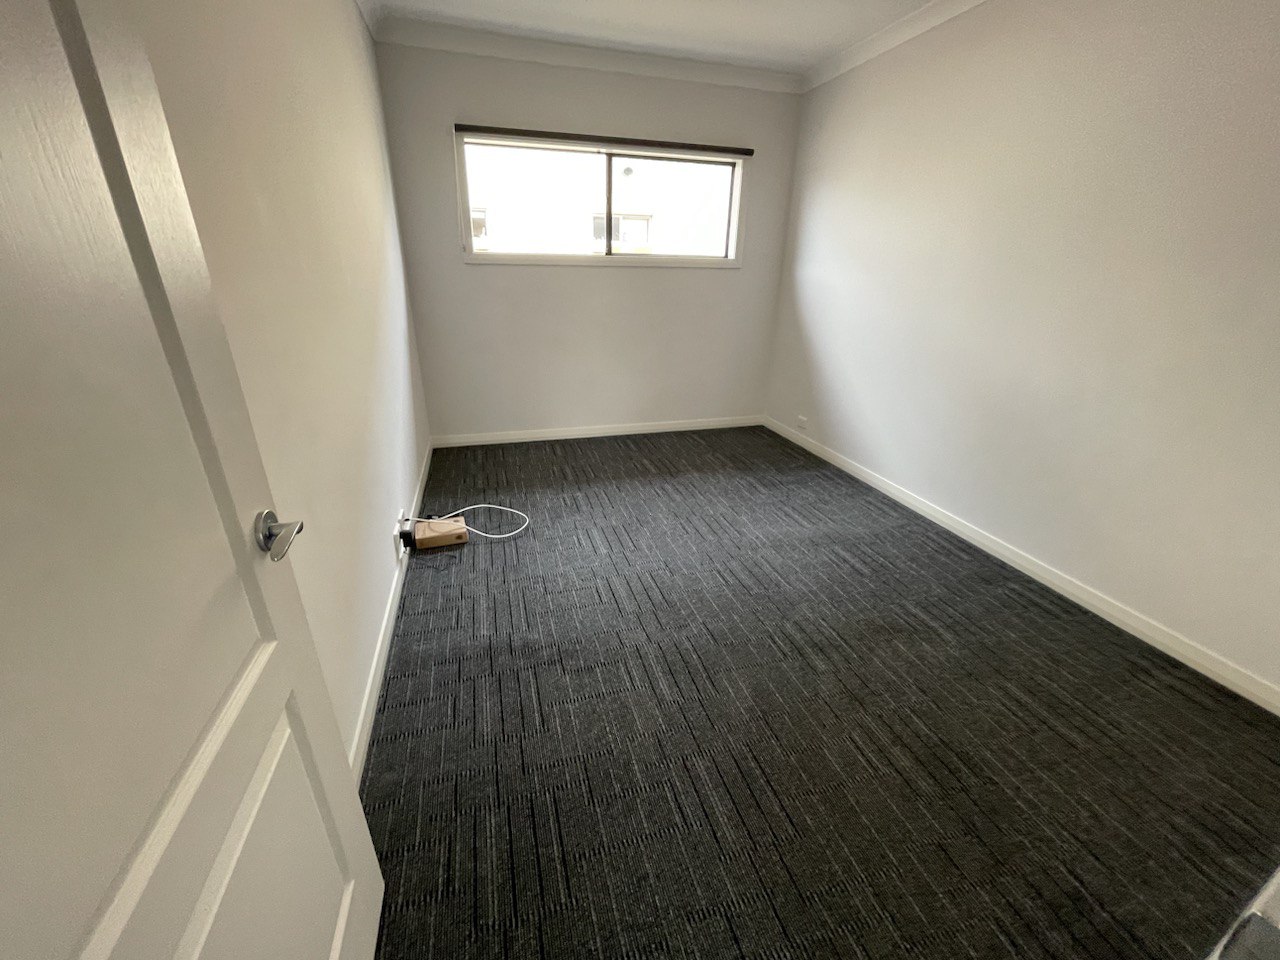 Best end of lease cleaning melbourne